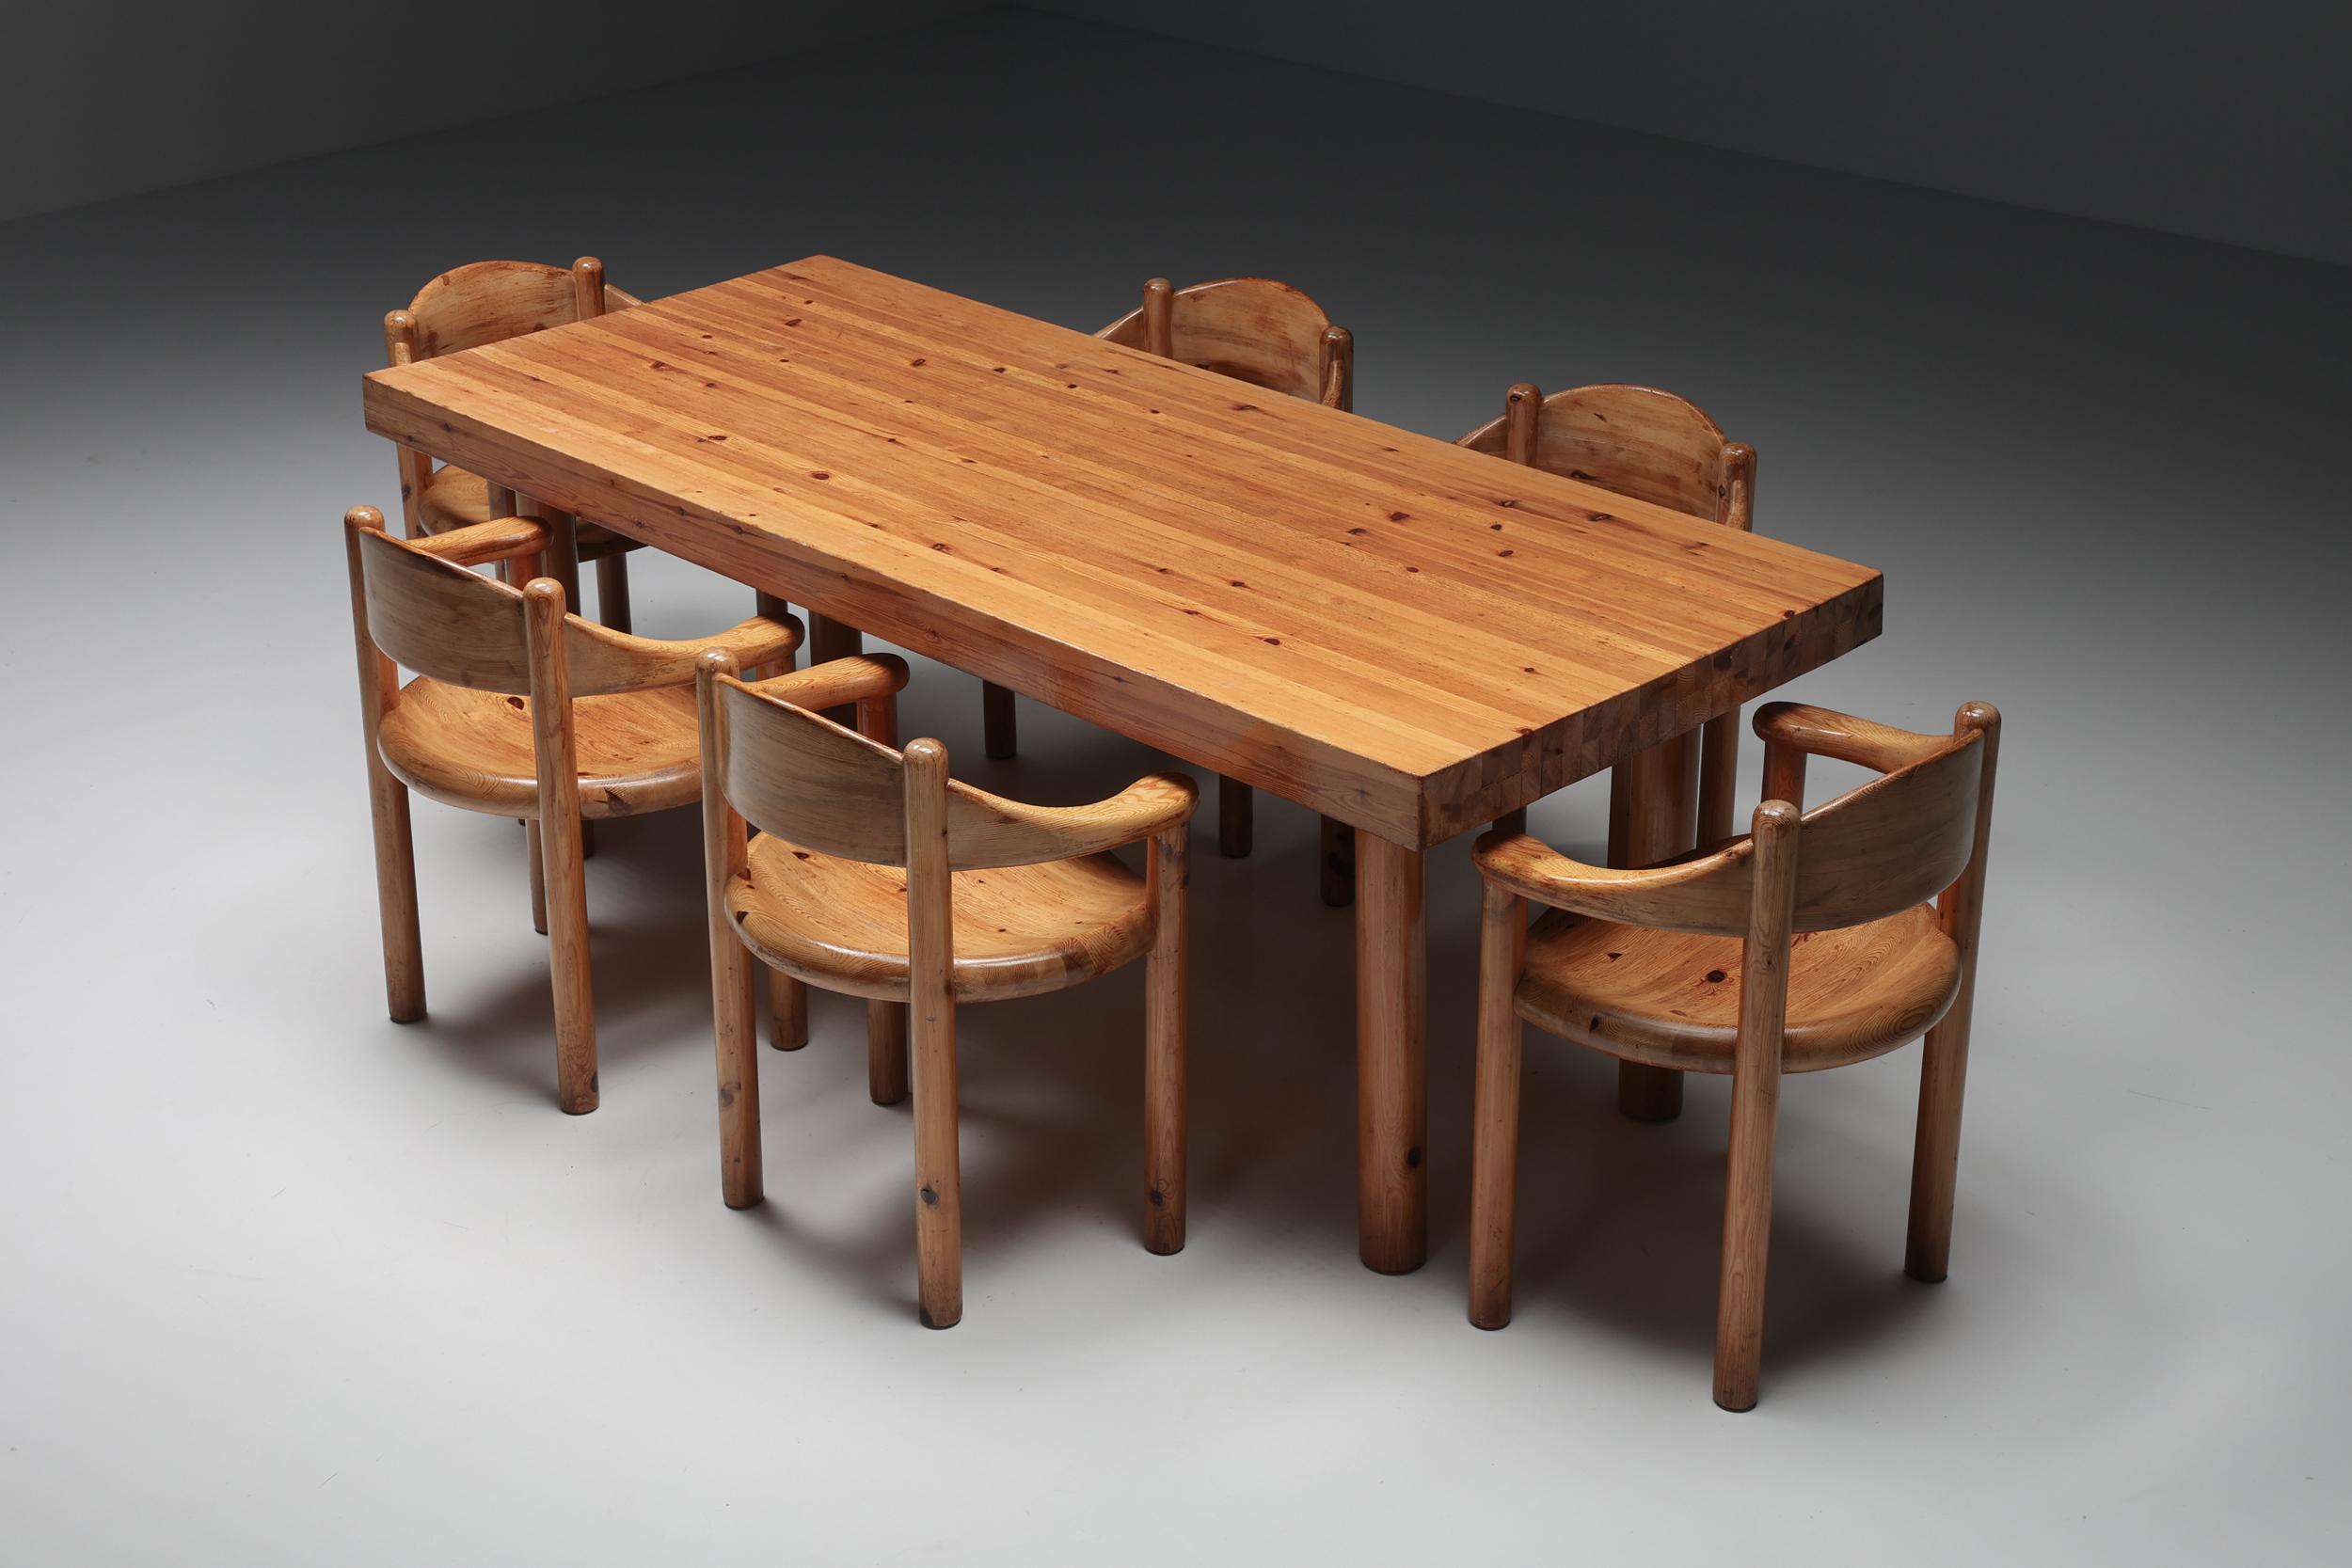 Rainer Daumiller Table; Denmark; Pine; Danish design; 1970's; Mid-Century Modern; 

Outstanding combination of Scandinavian craftsmanship & design. This dining table was designed by Rainer Daumiller in the 1970s. The table is made of remarkable